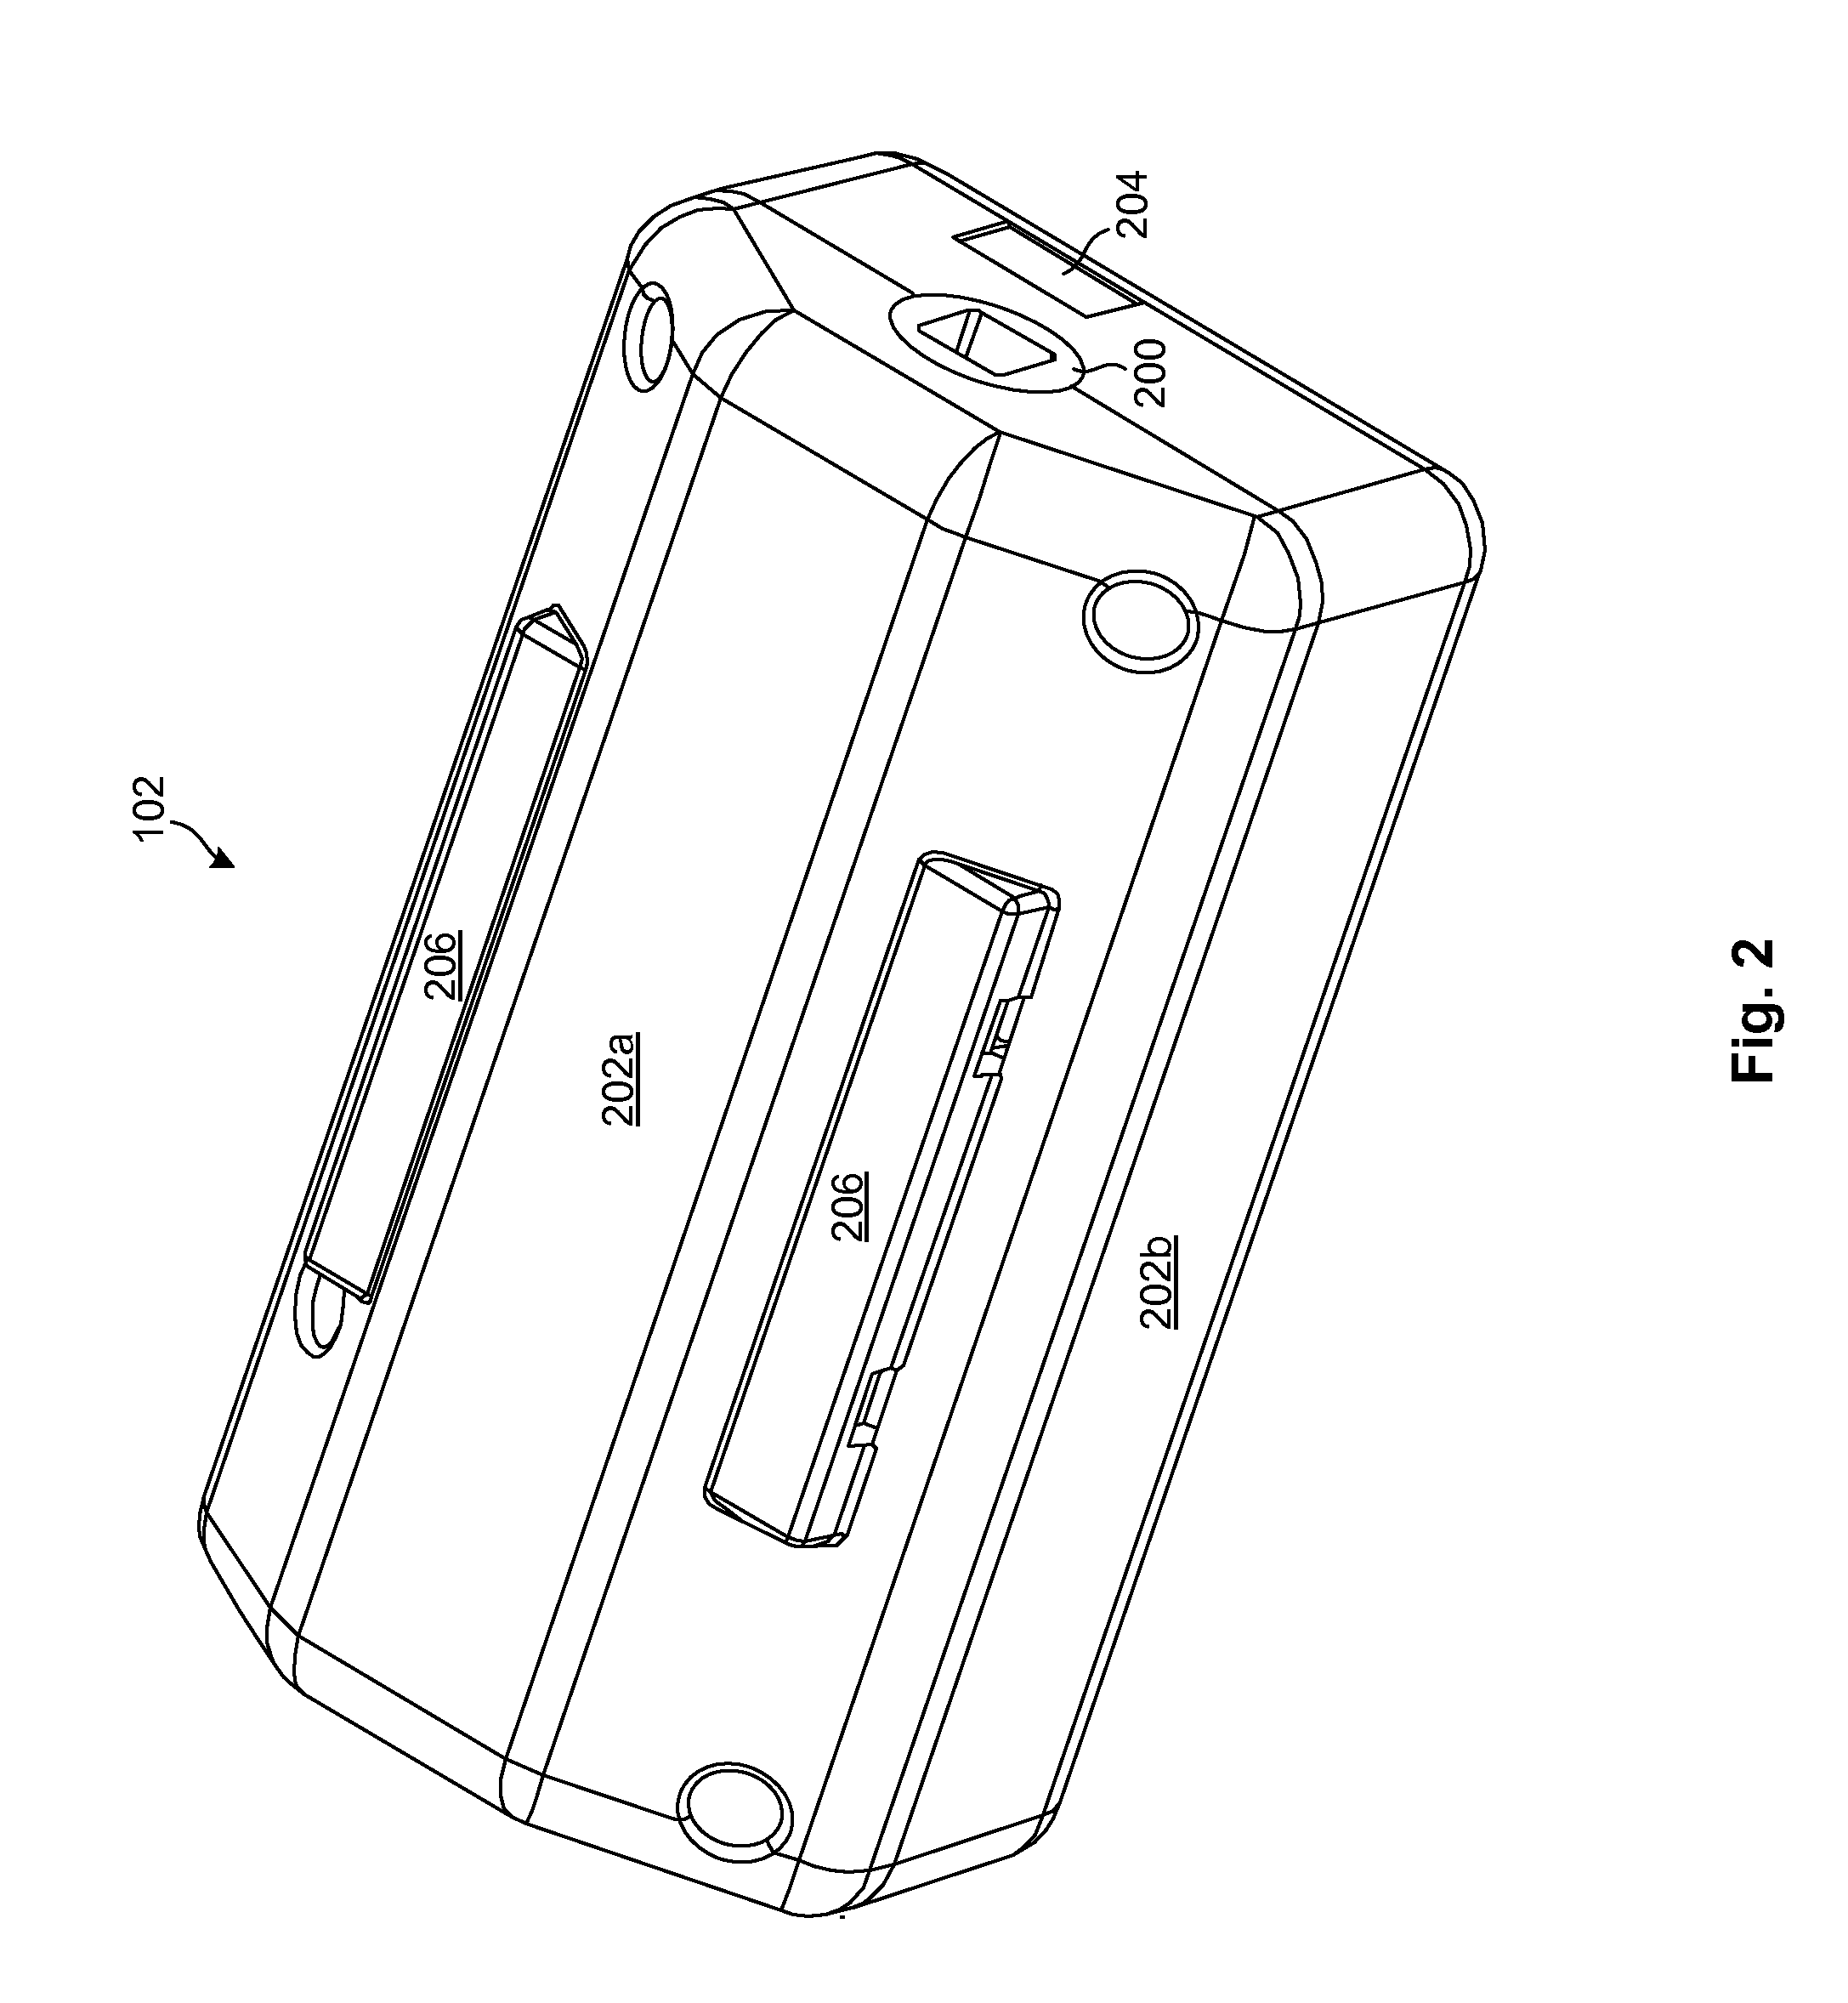 Motorized Gearbox Assembly having a Direct-Drive Position Encoder